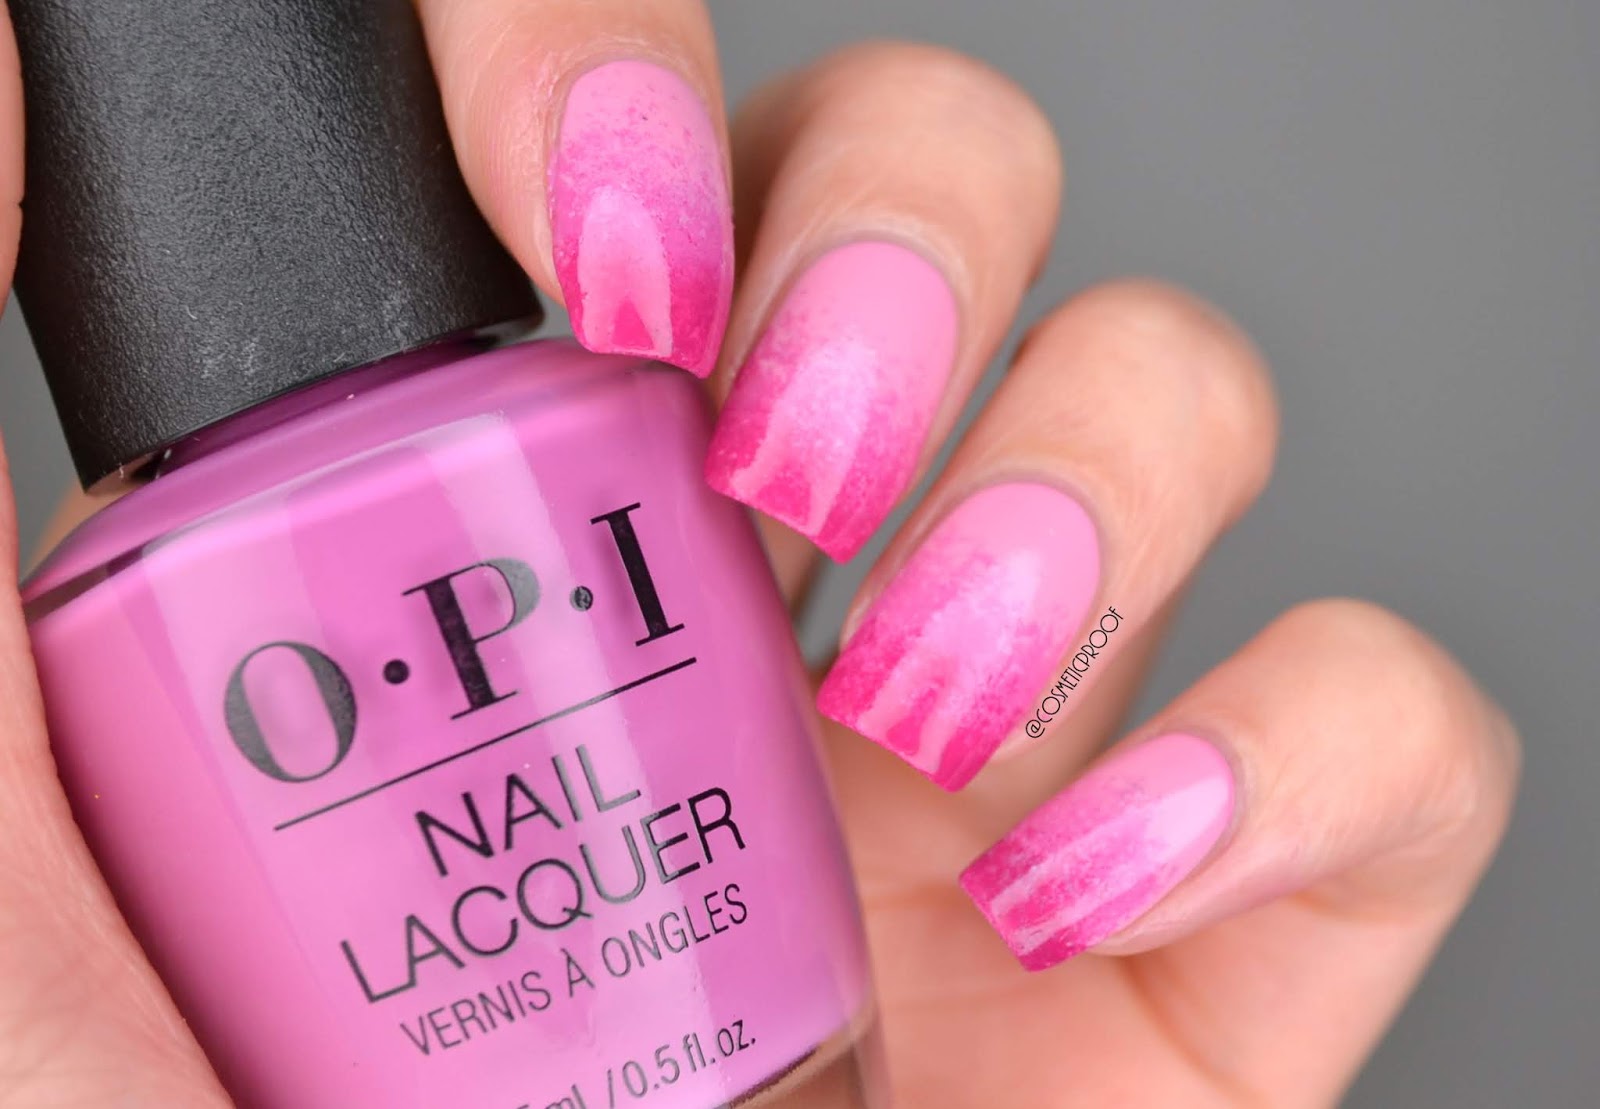 6. 20 Gorgeous Vertical Gradient Nail Art Designs to Try - wide 1